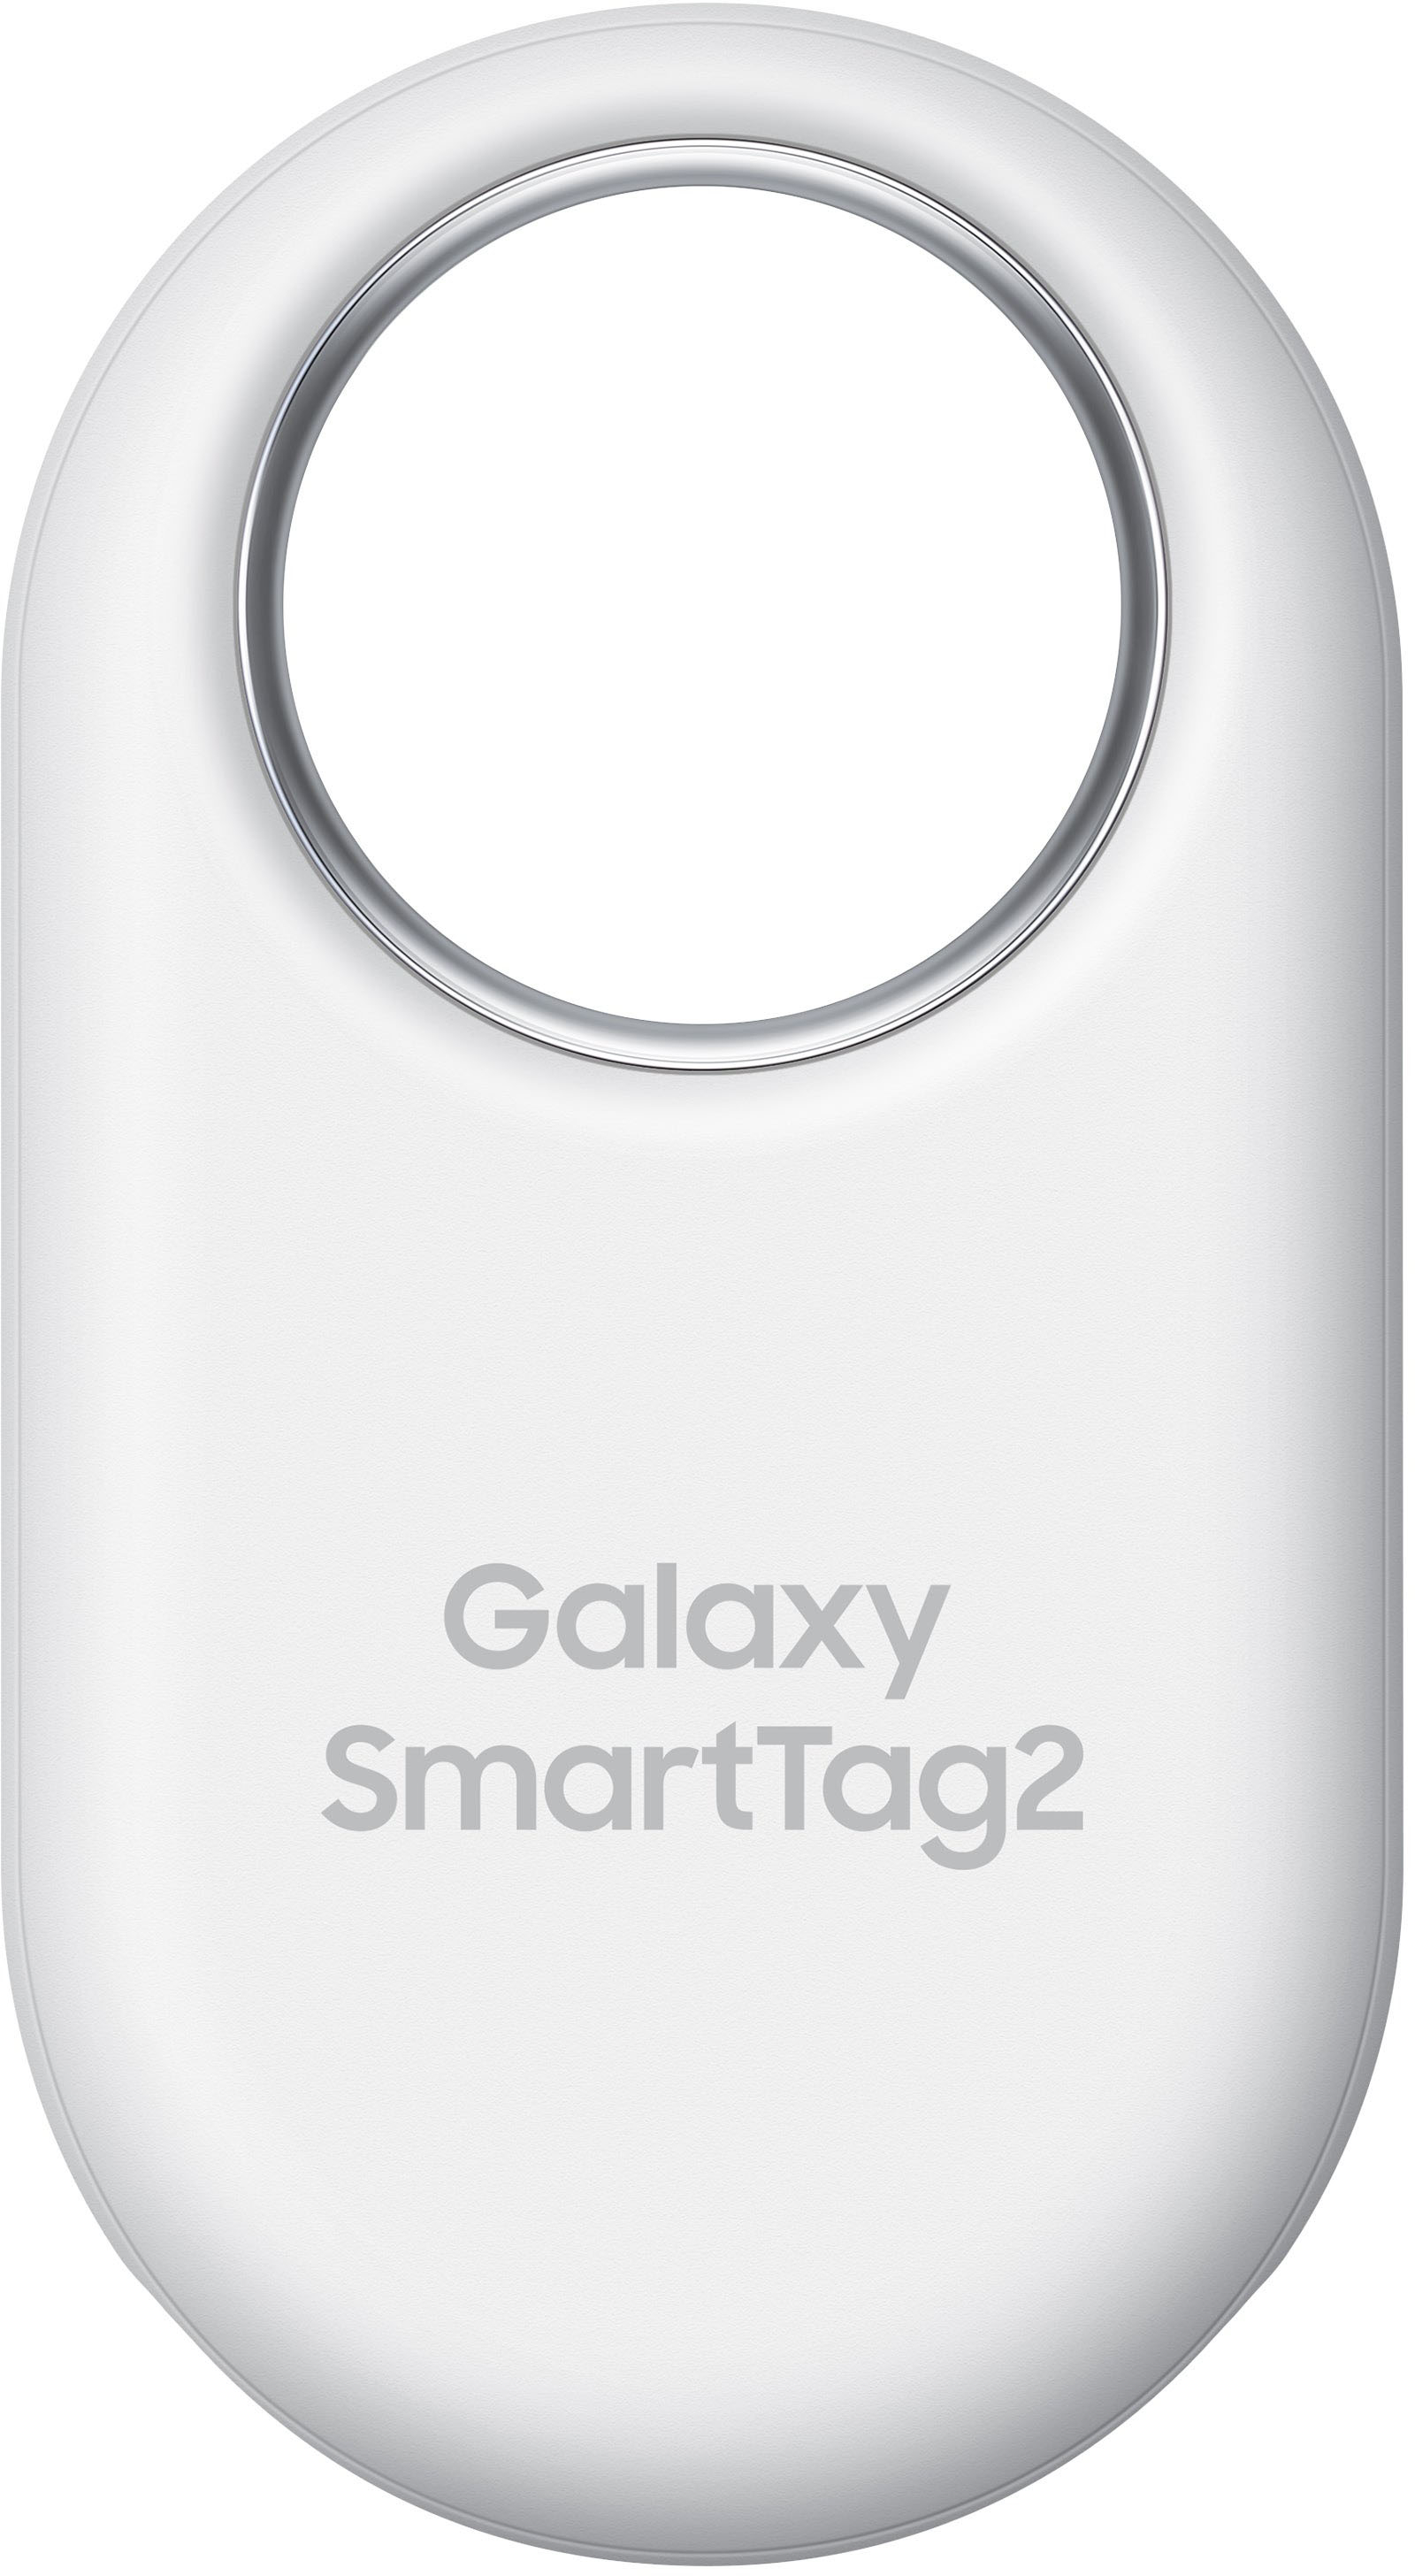 Samsung Galaxy SmartTag 2 shows up ahead of launch